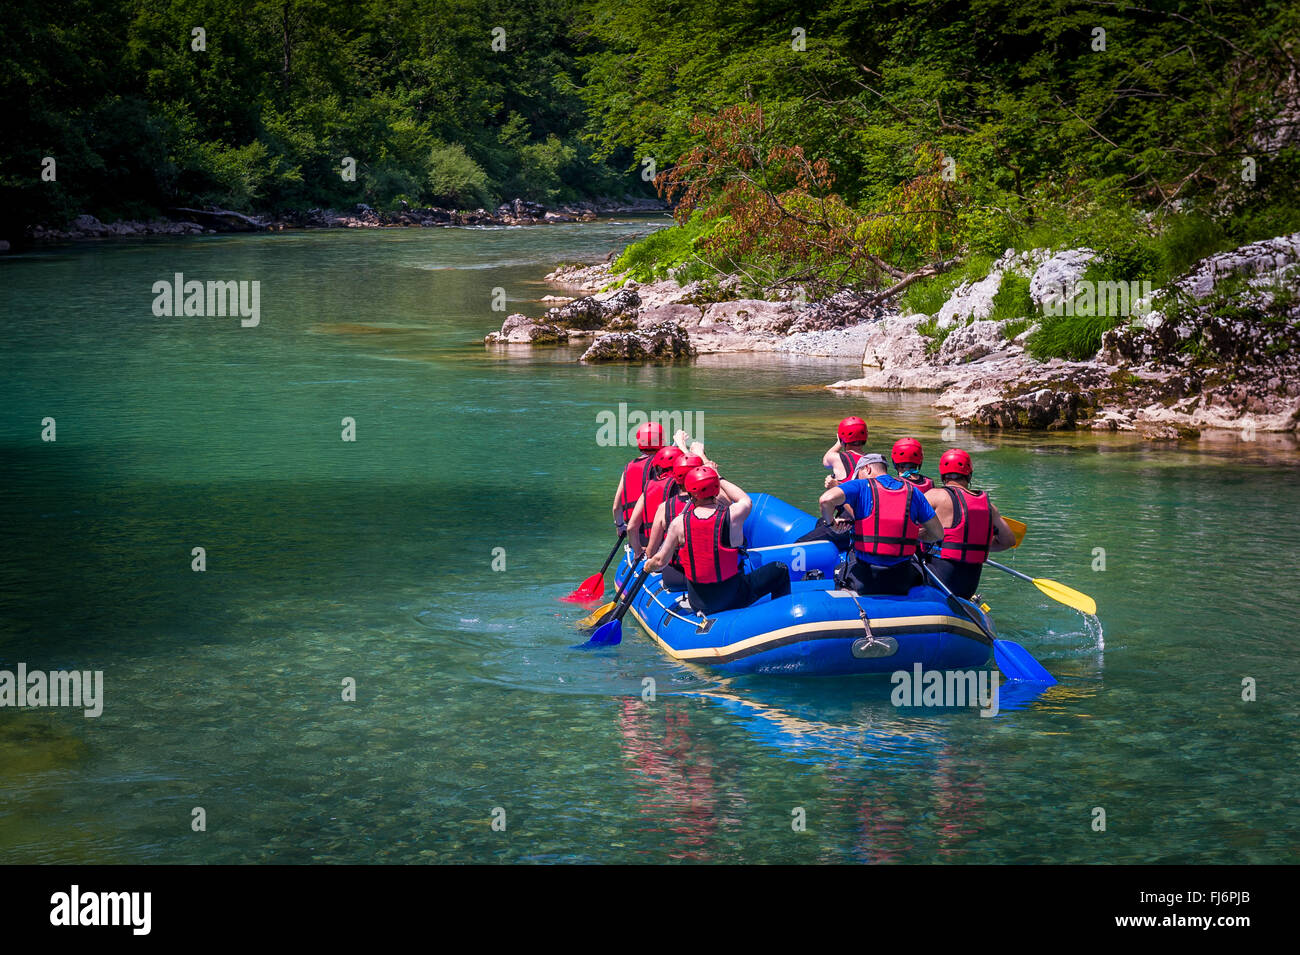 Group of tourists in the inflatable raft Stock Photo